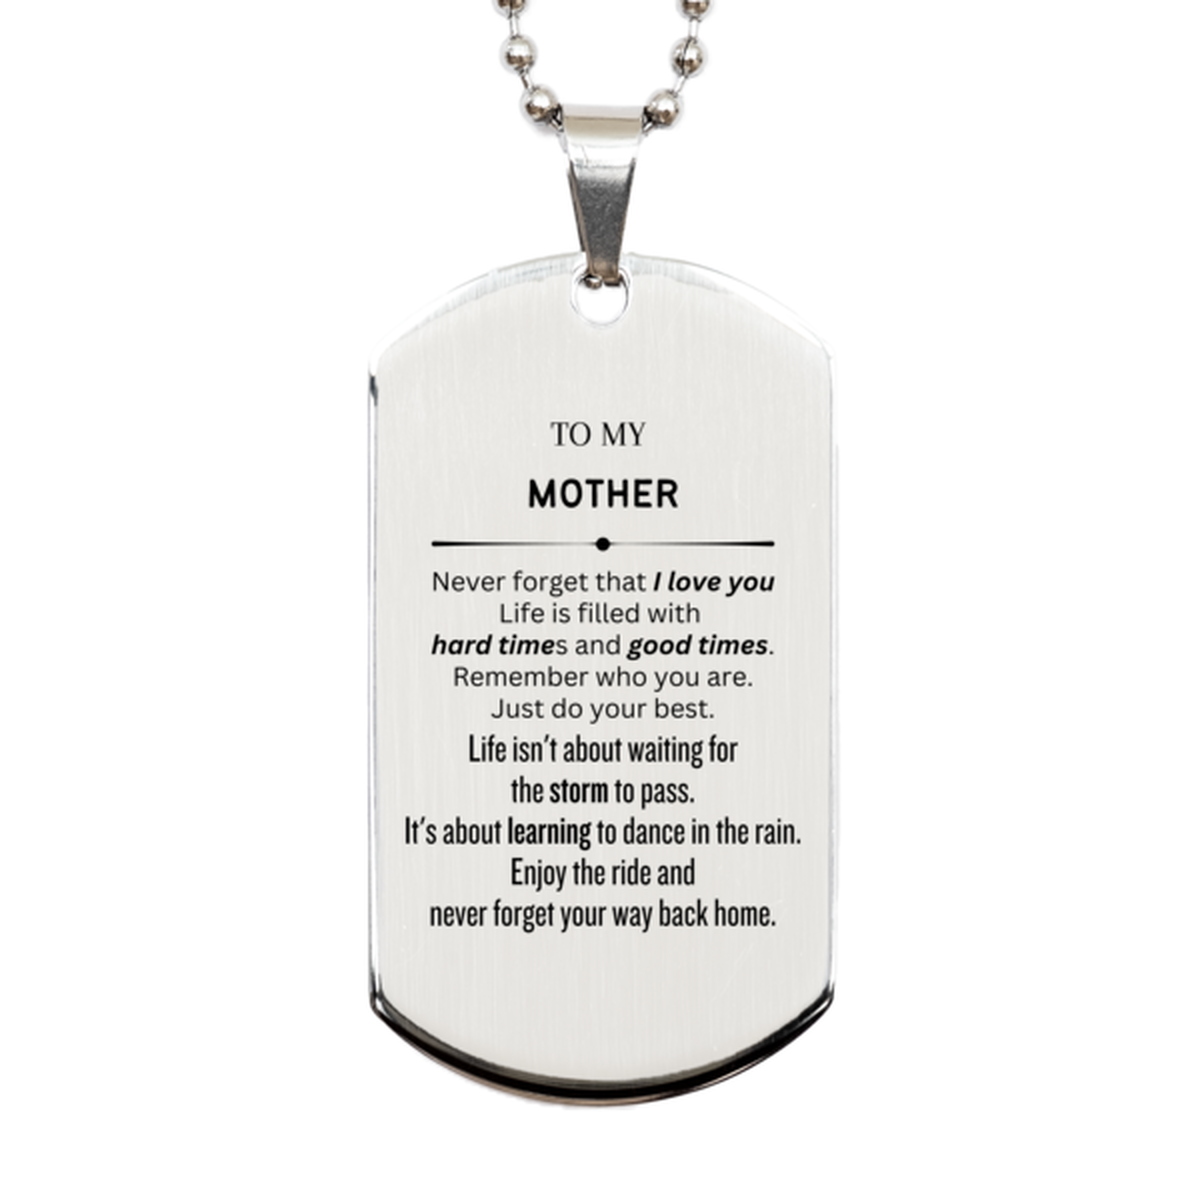 Christmas Mother Silver Dog Tag Gifts, To My Mother Birthday Thank You Gifts For Mother, Graduation Unique Gifts For Mother To My Mother Never forget that I love you life is filled with hard times and good times. Remember who you are. Just do your best